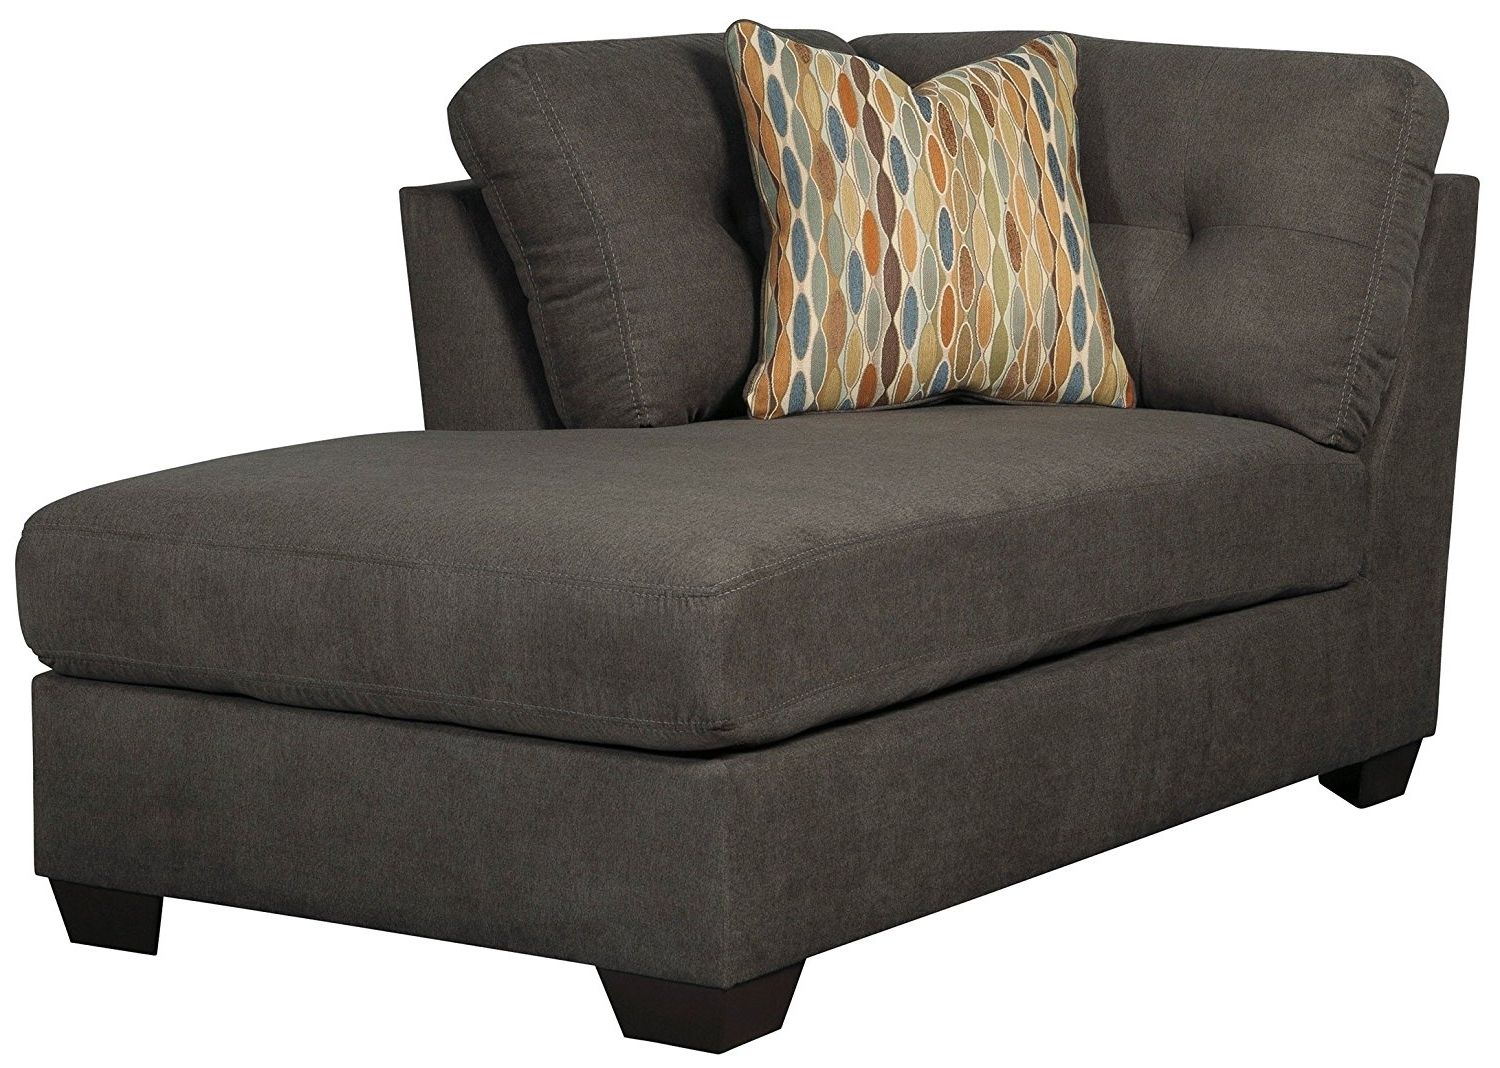 Favorite Amazon: Ashley Furniture Delta City Right Corner Chaise Lounge With Regard To Ashley Furniture Chaise Lounges (Photo 2 of 15)